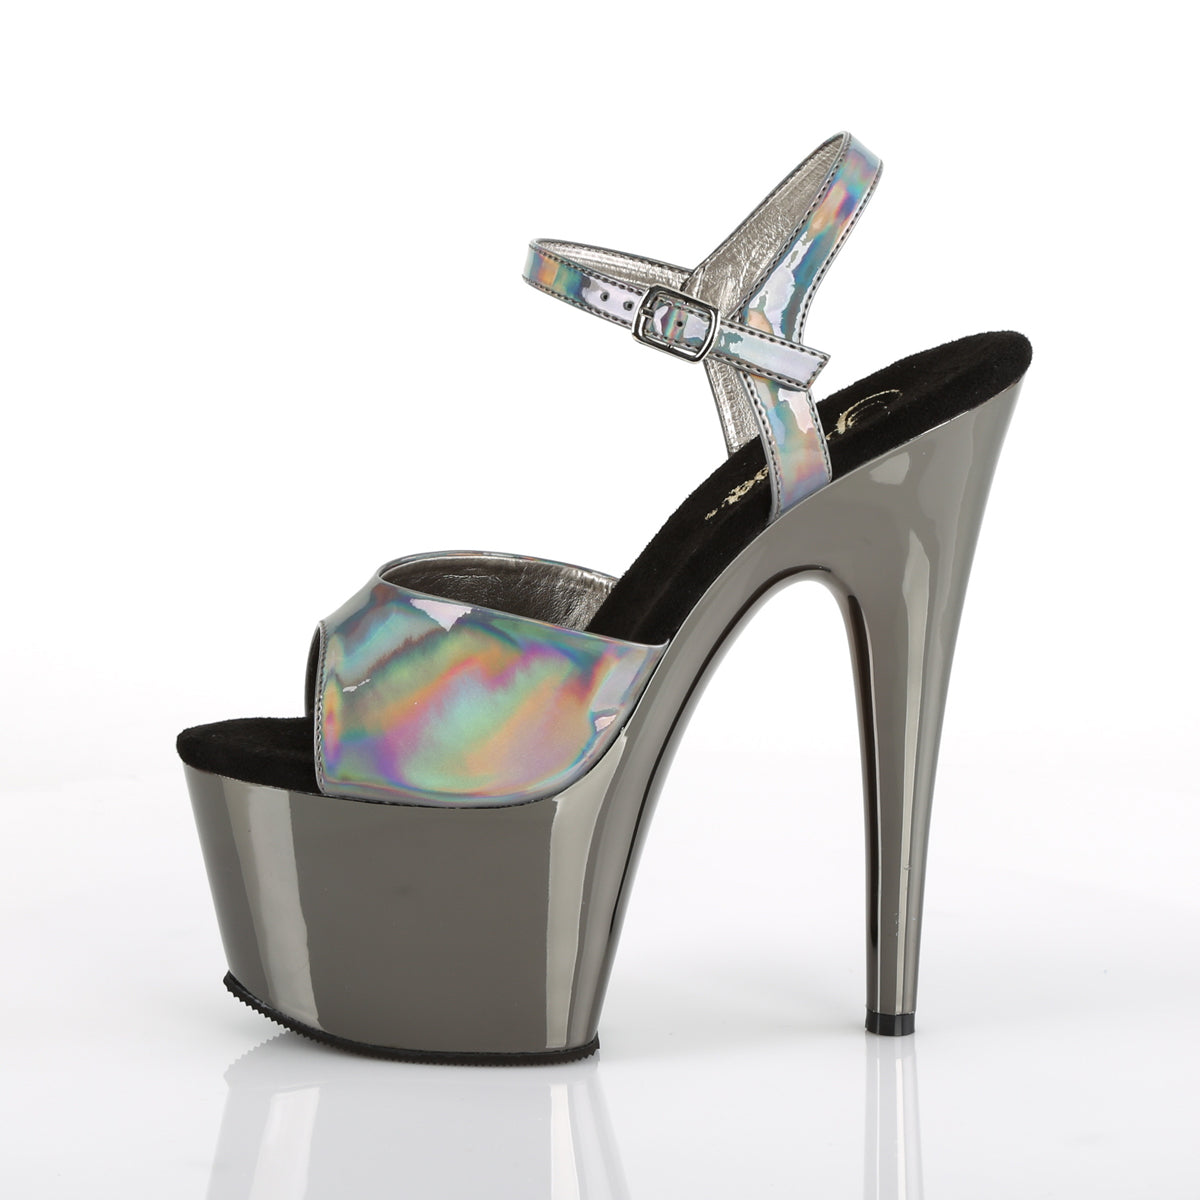 Pleaser Womens Sandals ADORE-709HGCH Pewter Hologram/Pewter Chrome